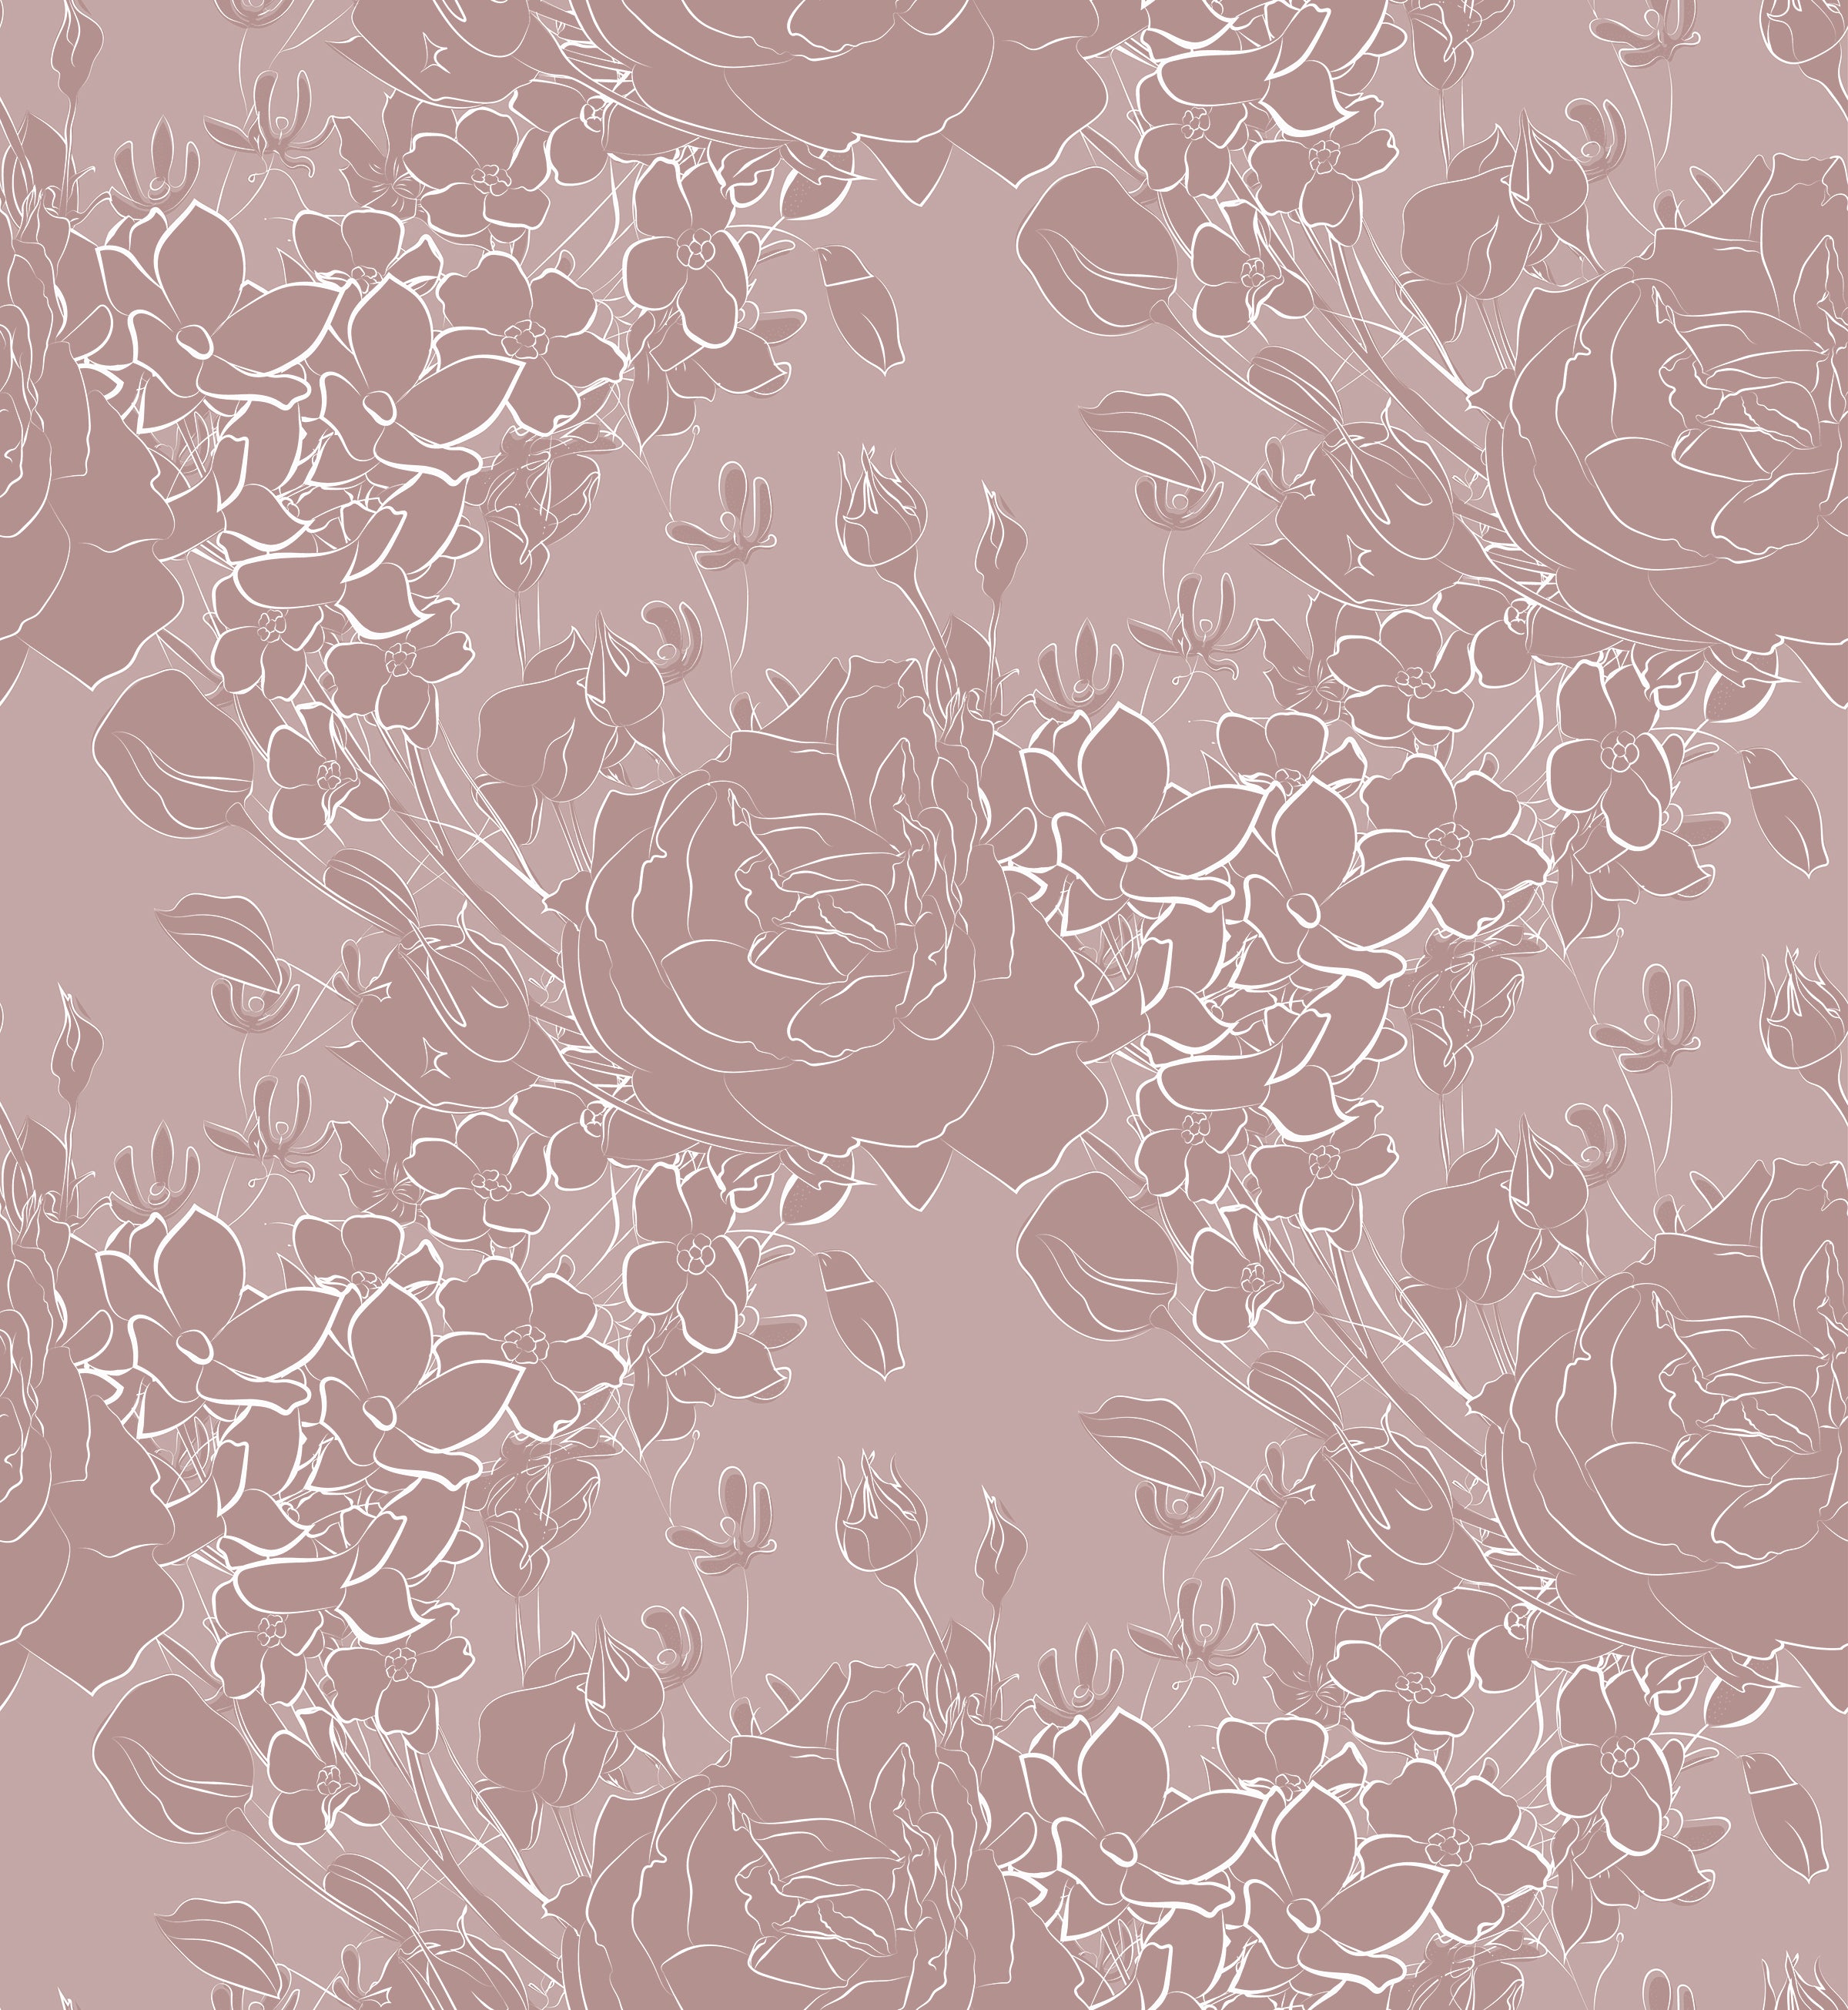 A close-up view of the Dusty Rose Floral Wallpaper, featuring elegant line drawings of roses and other flowers in white on a soft pink background, creating a delicate and romantic aesthetic.